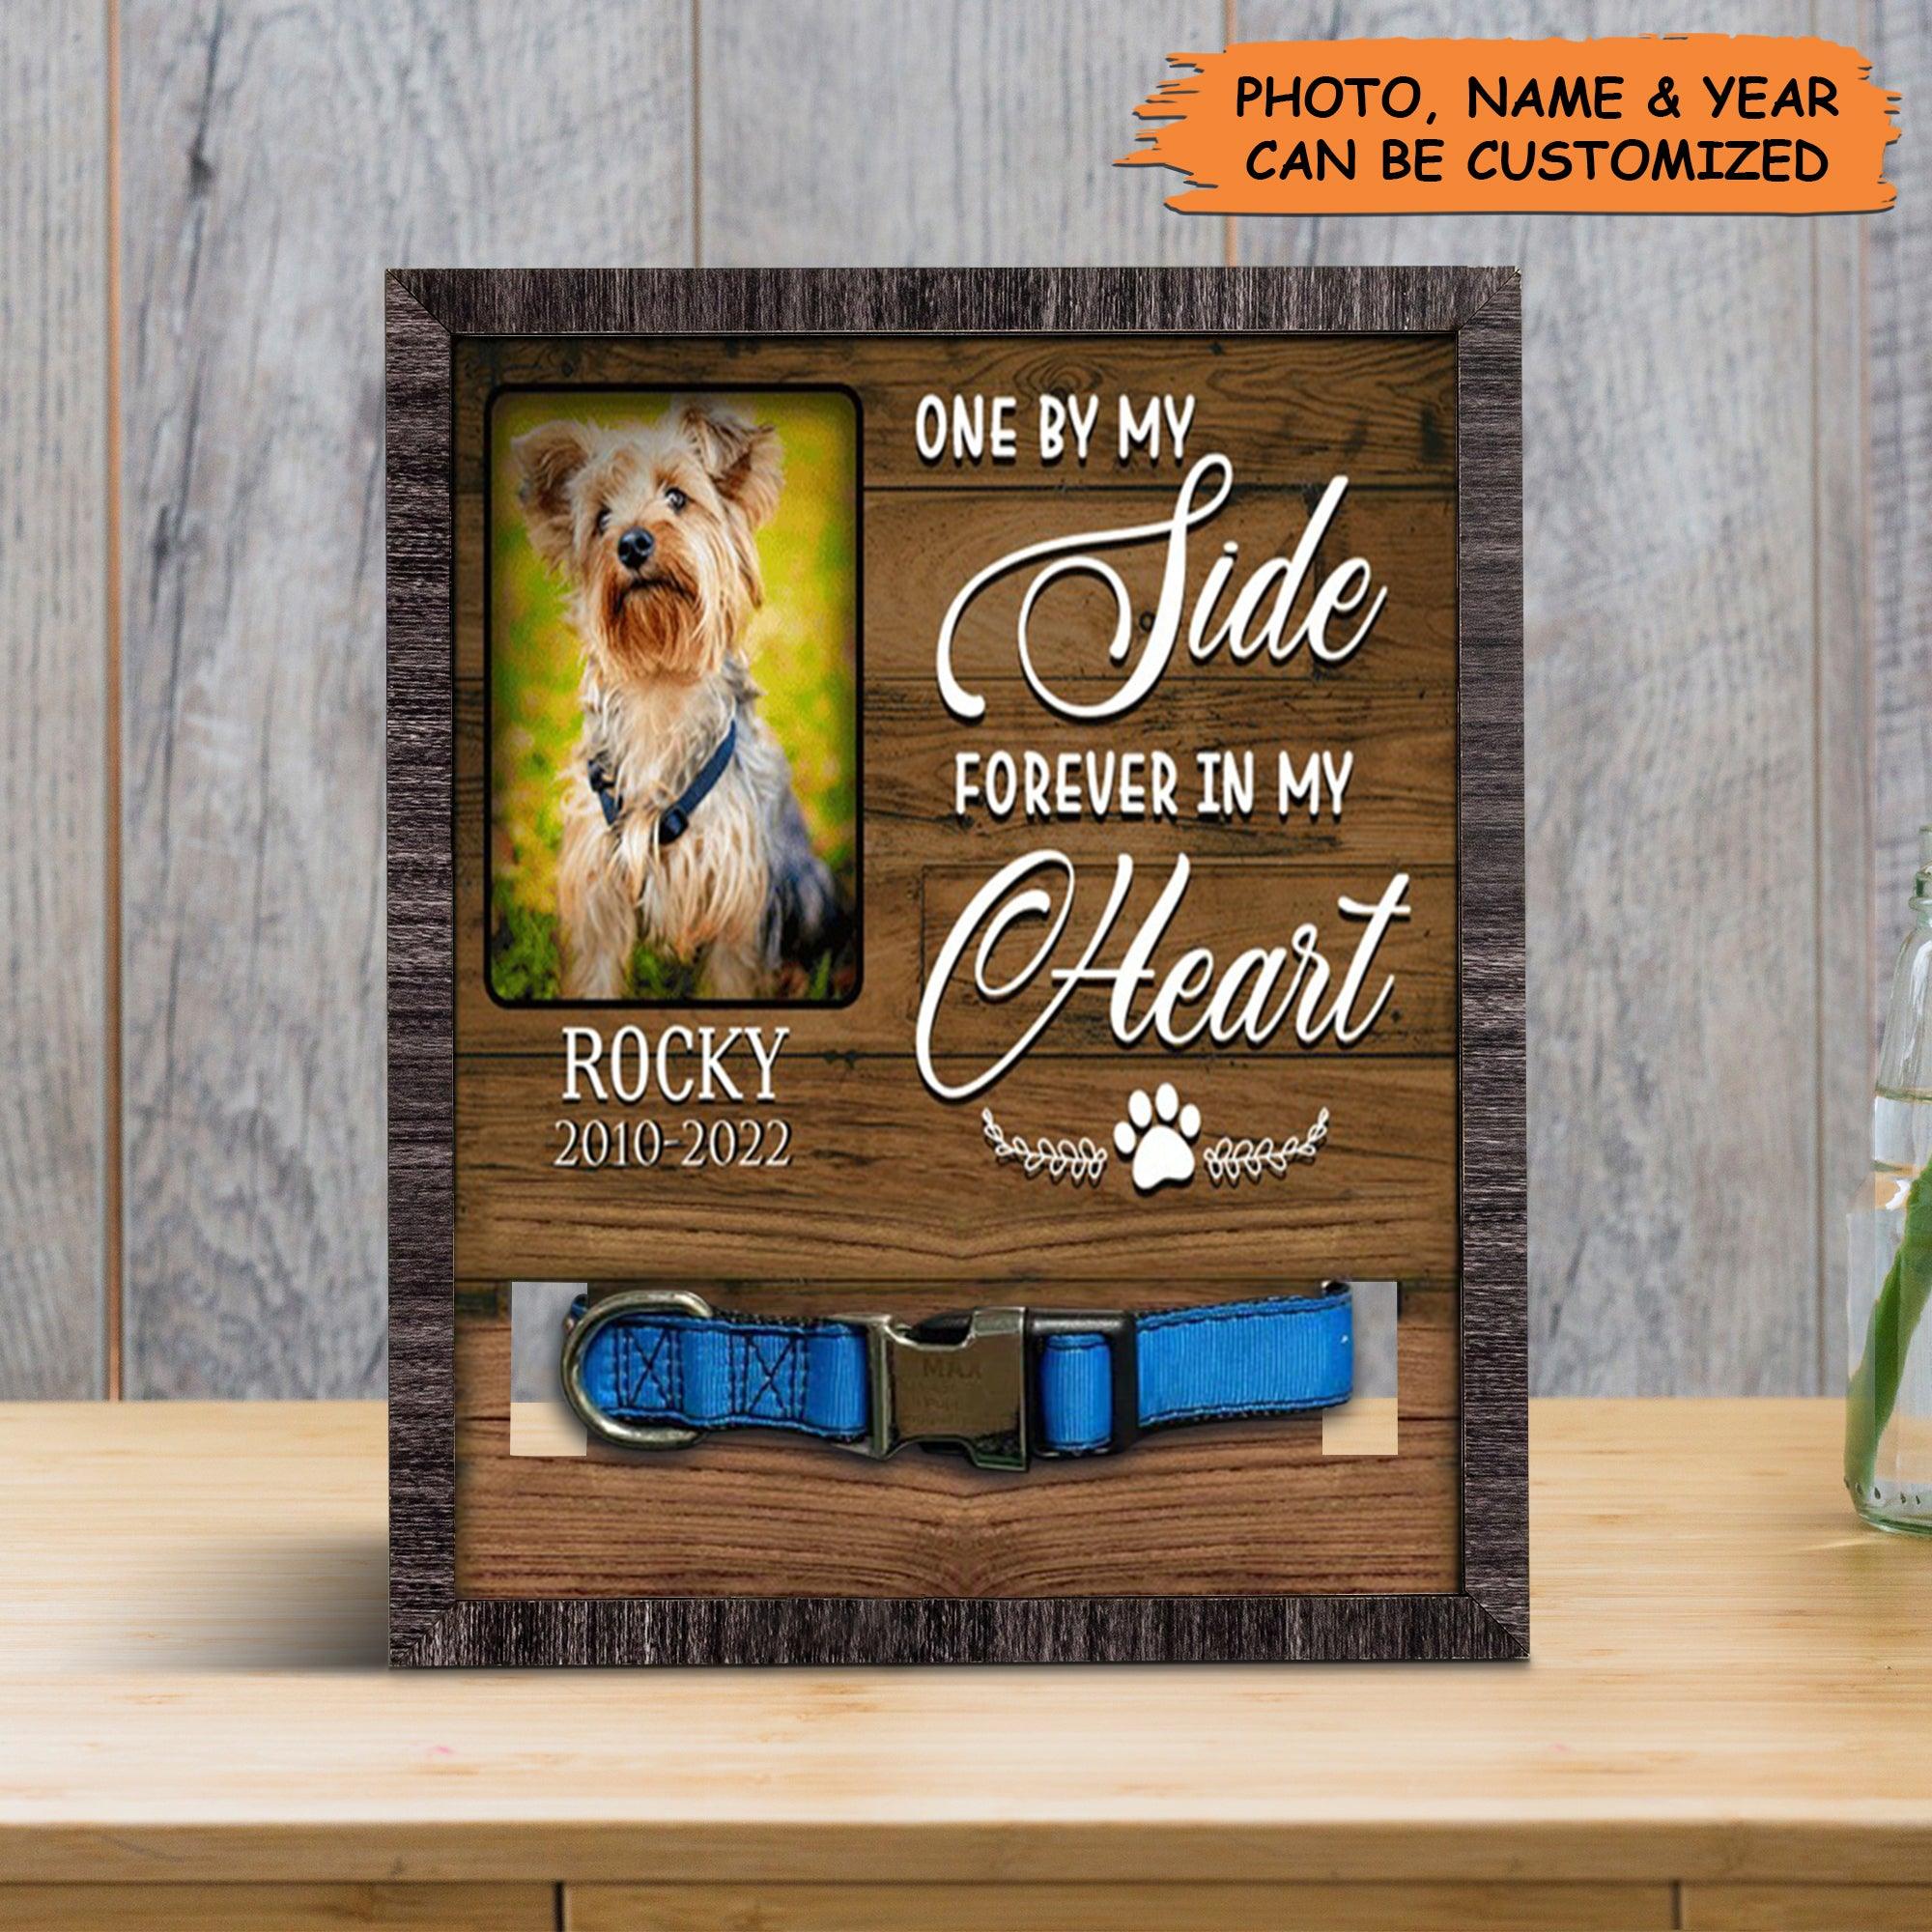 Personalized Pet Collar Frame - Custom A Yorkshire Terrier Picture Frames, Pet Loss Sympathy, Memorial Pet Collar Sign - Gift For Grieving Pet Owner - Amzanimalsgift